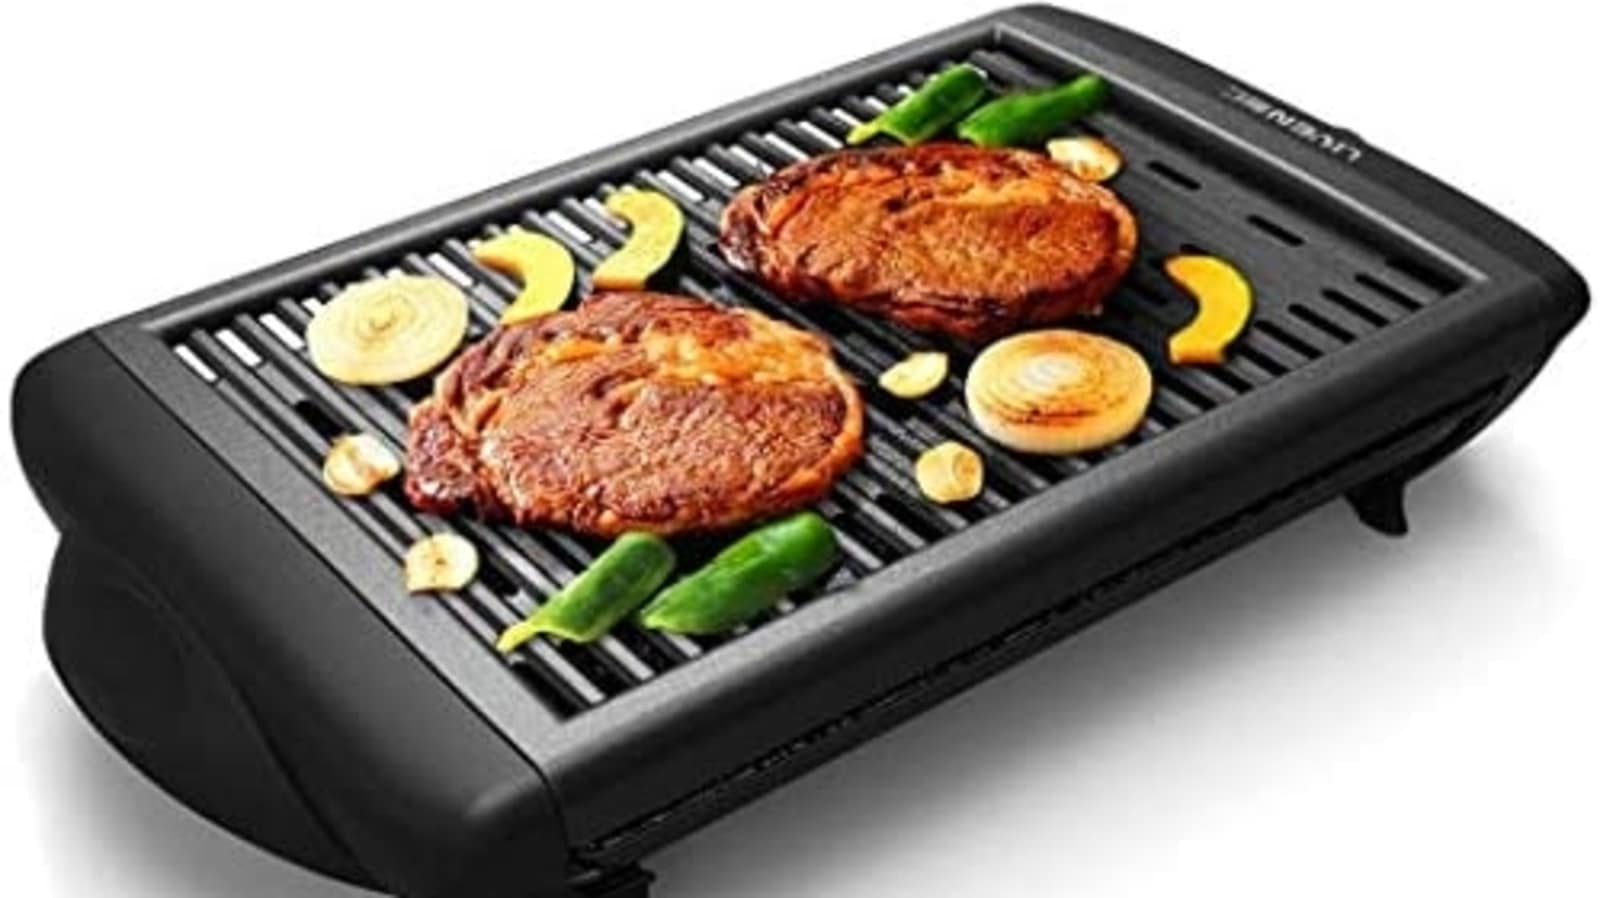 Electric Grills Indoor Korean Bbq Grill Ceramic Smokeless Non-stick Less  smoke Home Electric Grill Green